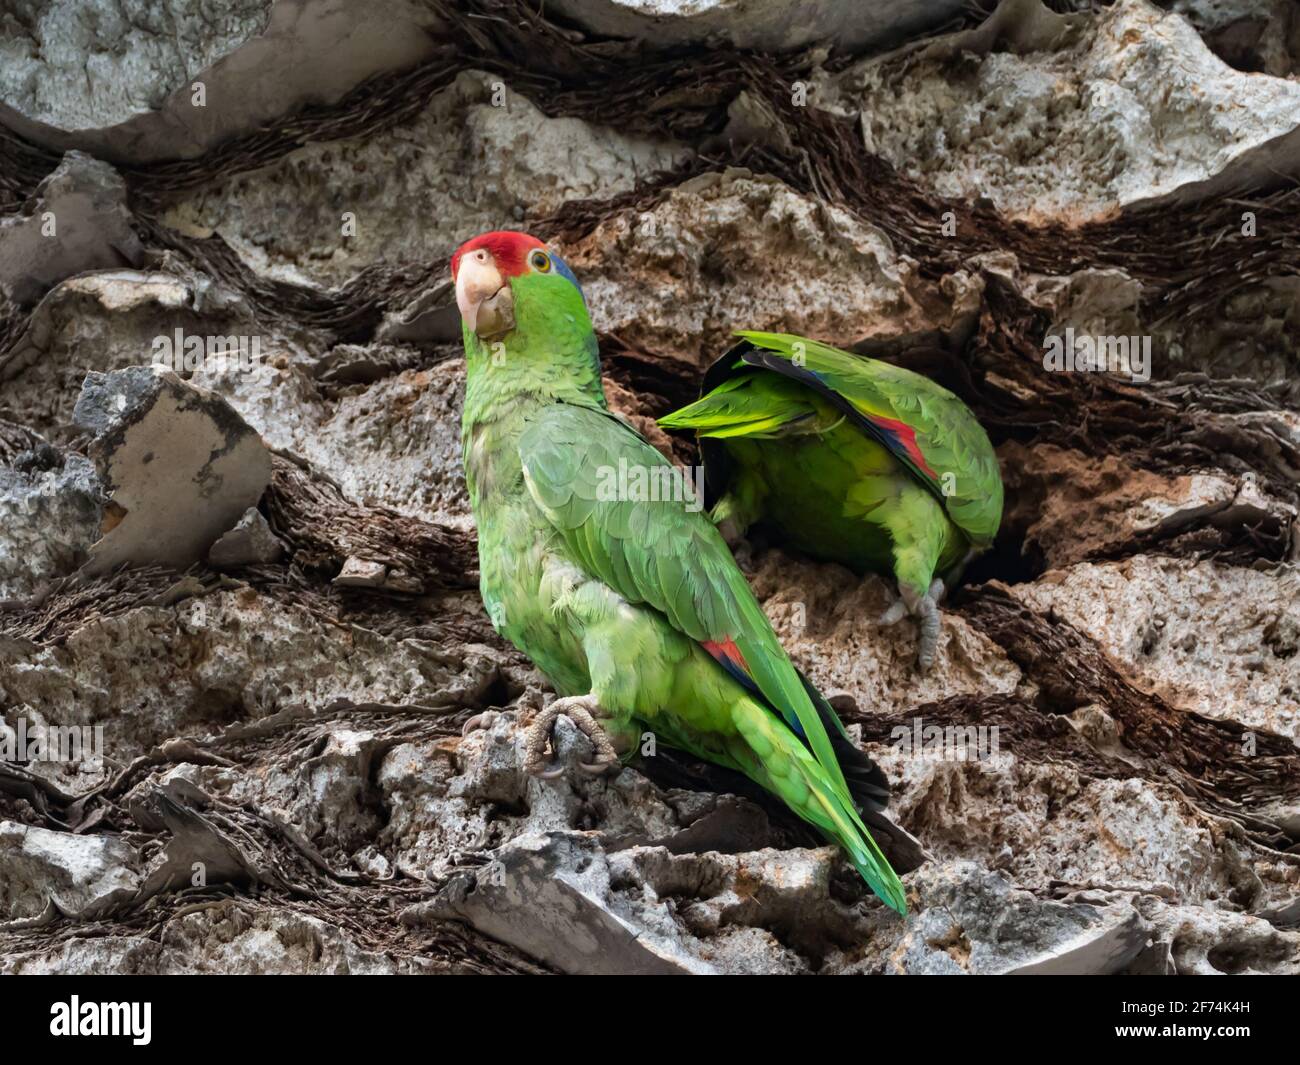 Red-crowned parrot, Amazona viridigenalis, an established exotic Amazona parrot in San Diego, California, USA Stock Photo